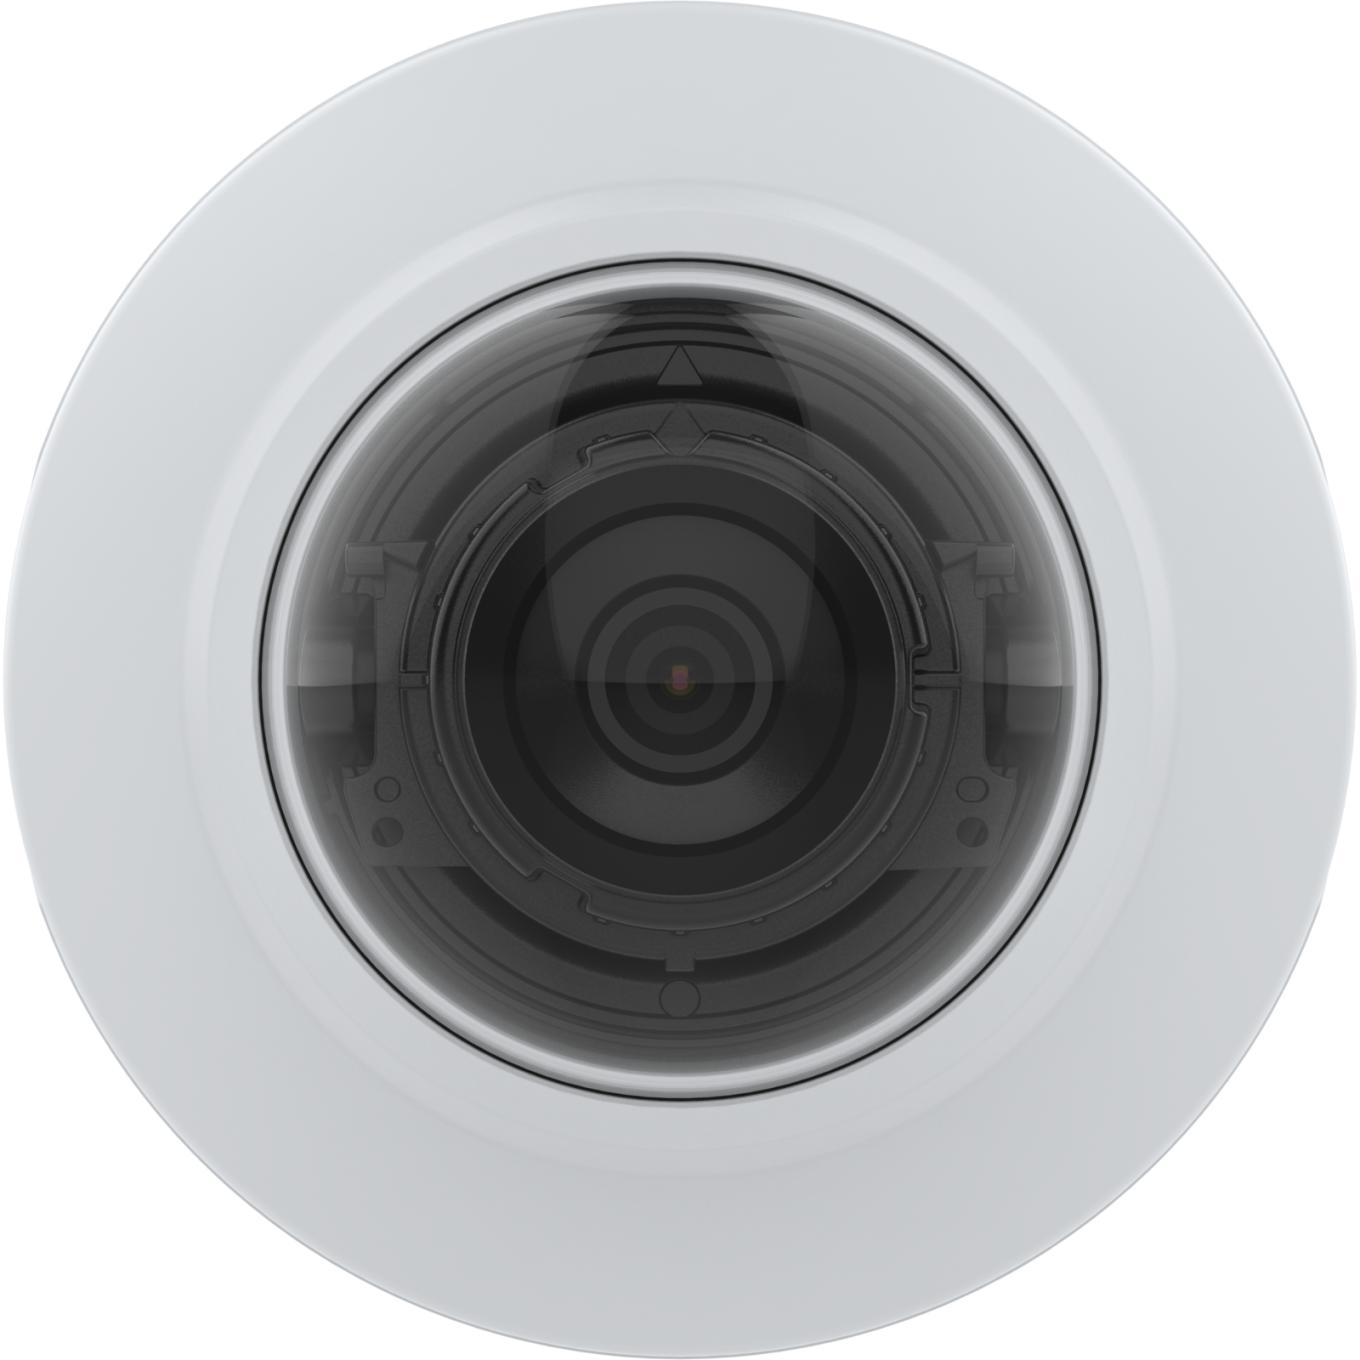 AXIS M4215-LV Dome Camera, wall, viewed from its front